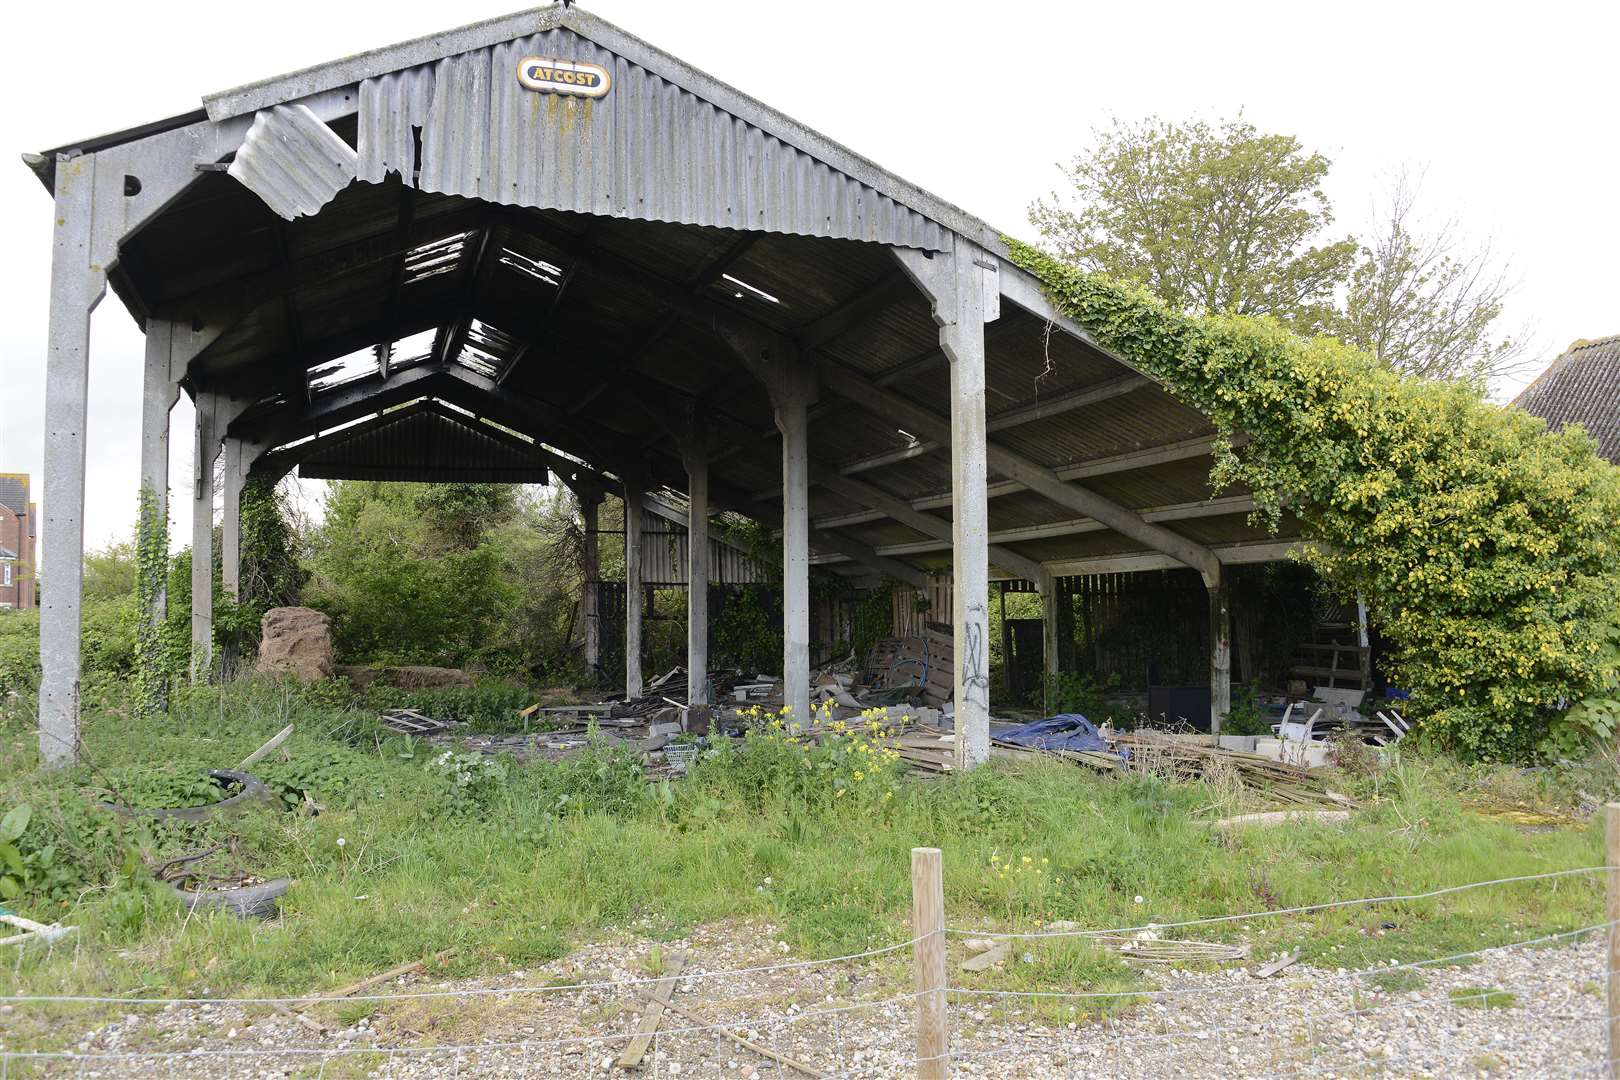 Kitewood says it will retain the former farmhouse and barn that sit either side of the footpath leading to the Albert Friday Bridge in Herne Bay